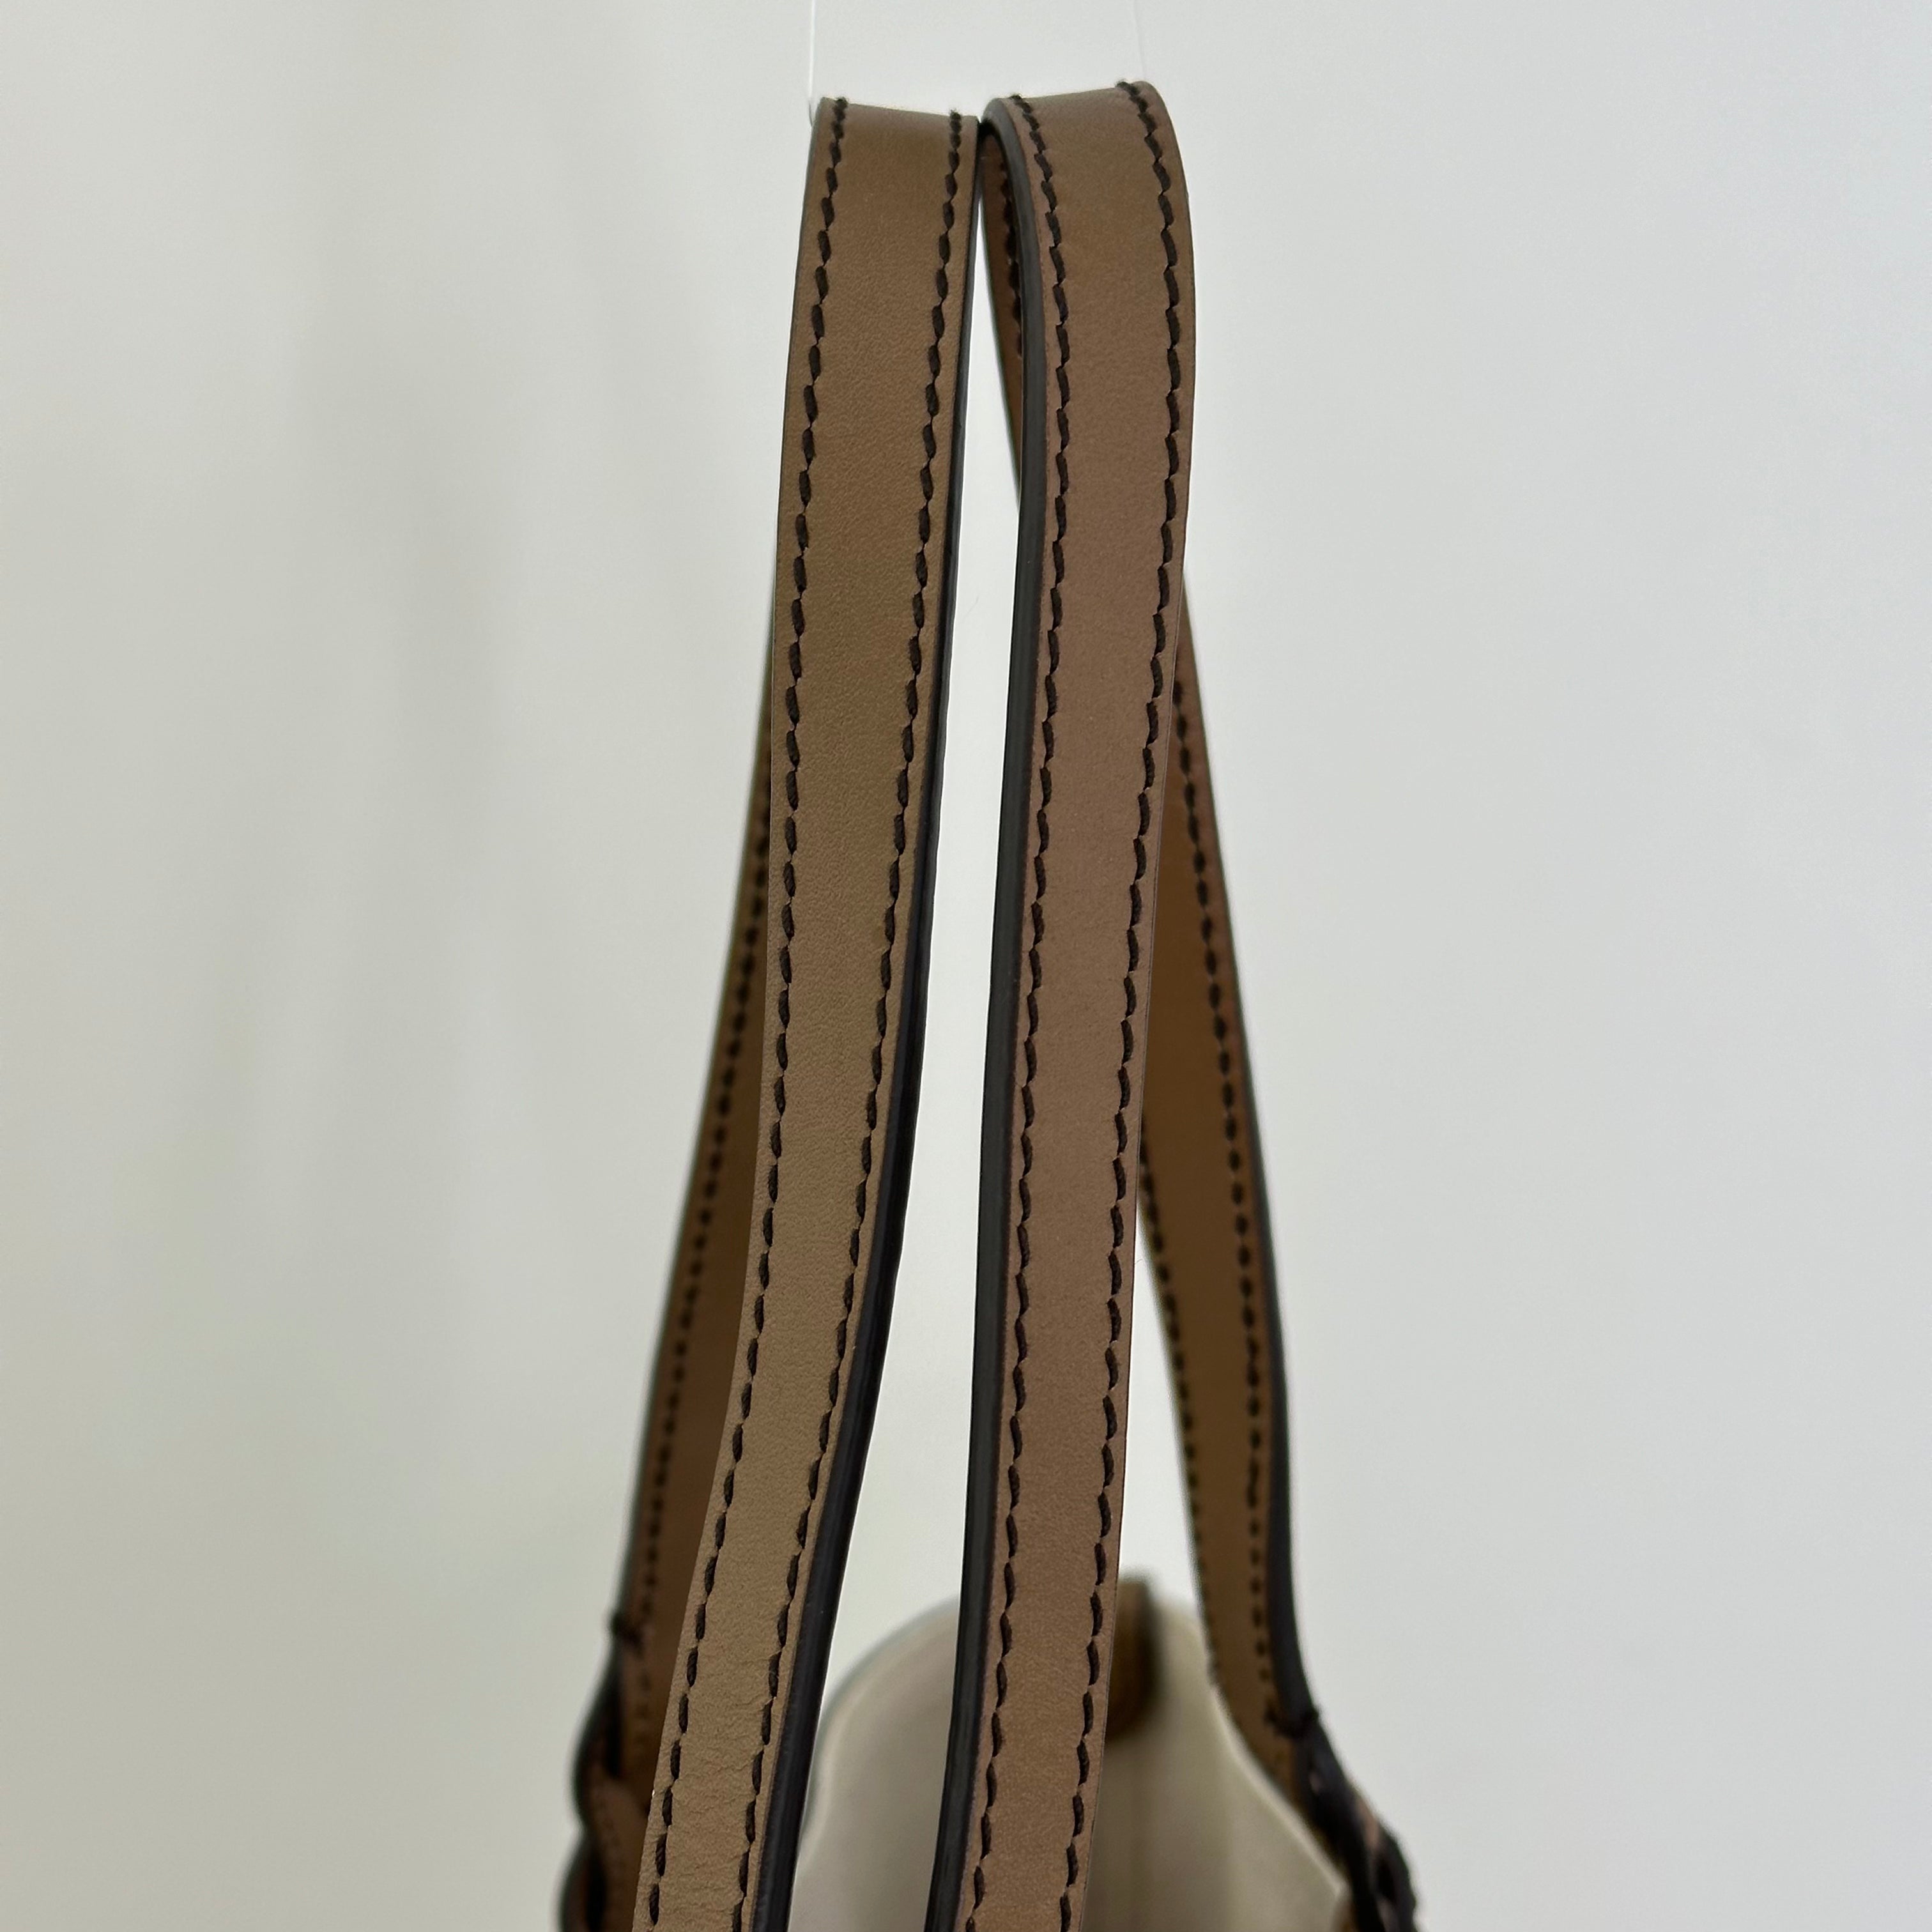 GG Brown Leather Tote